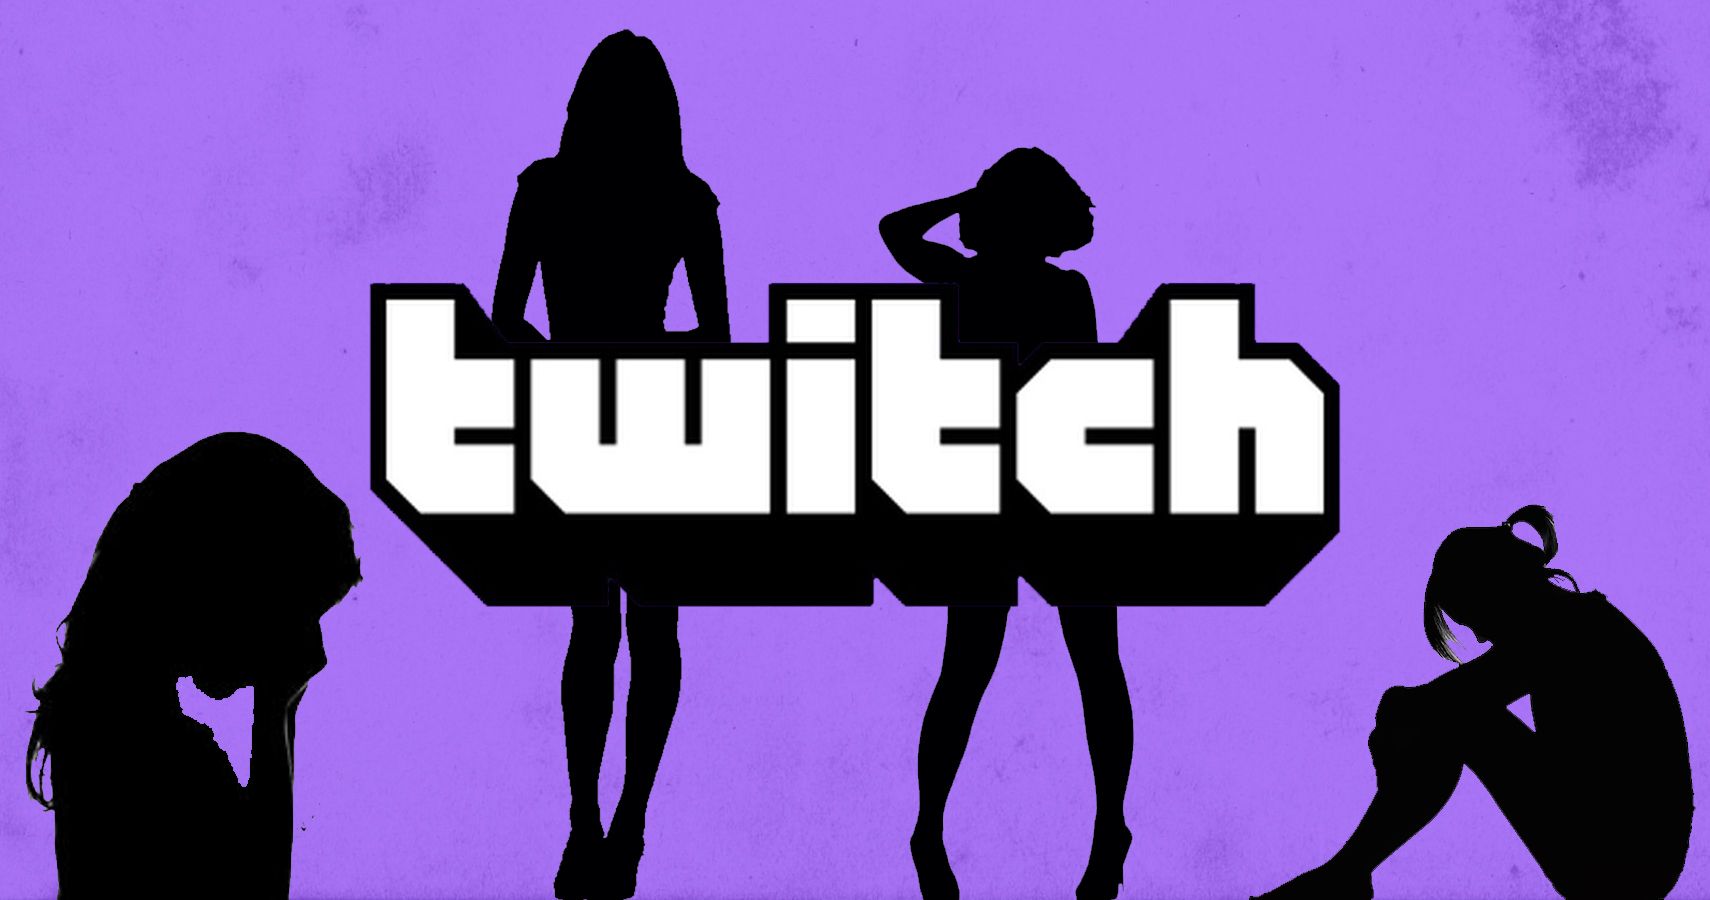 The Twitch logo on a purple background with women's silhouettes behind the logo.